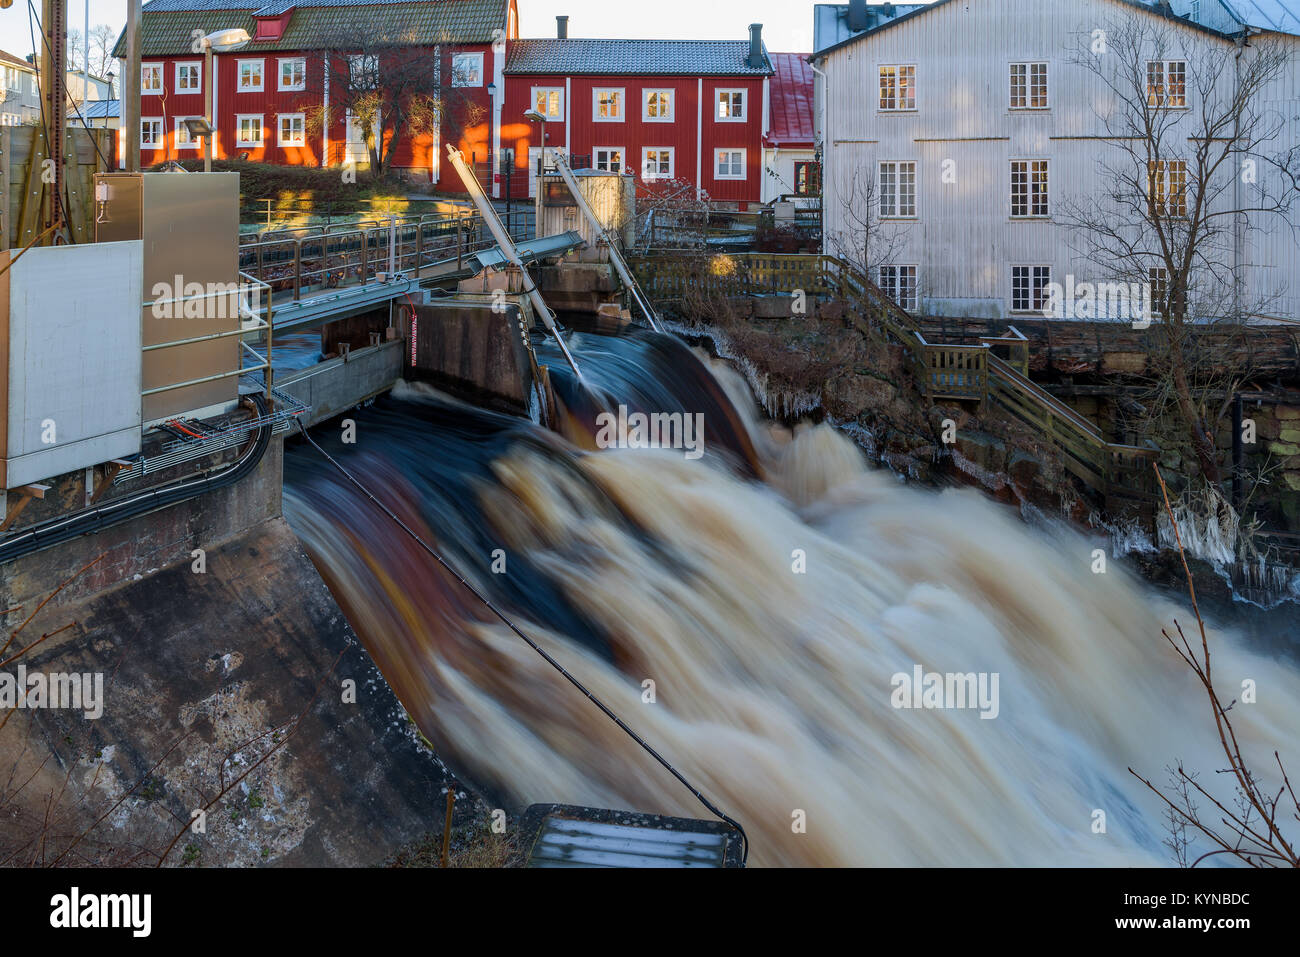 Open flood gates at the city waterfall In Ronneby, Sweden. Flooding upstream makes the water overflow. Houses in background. Stock Photo